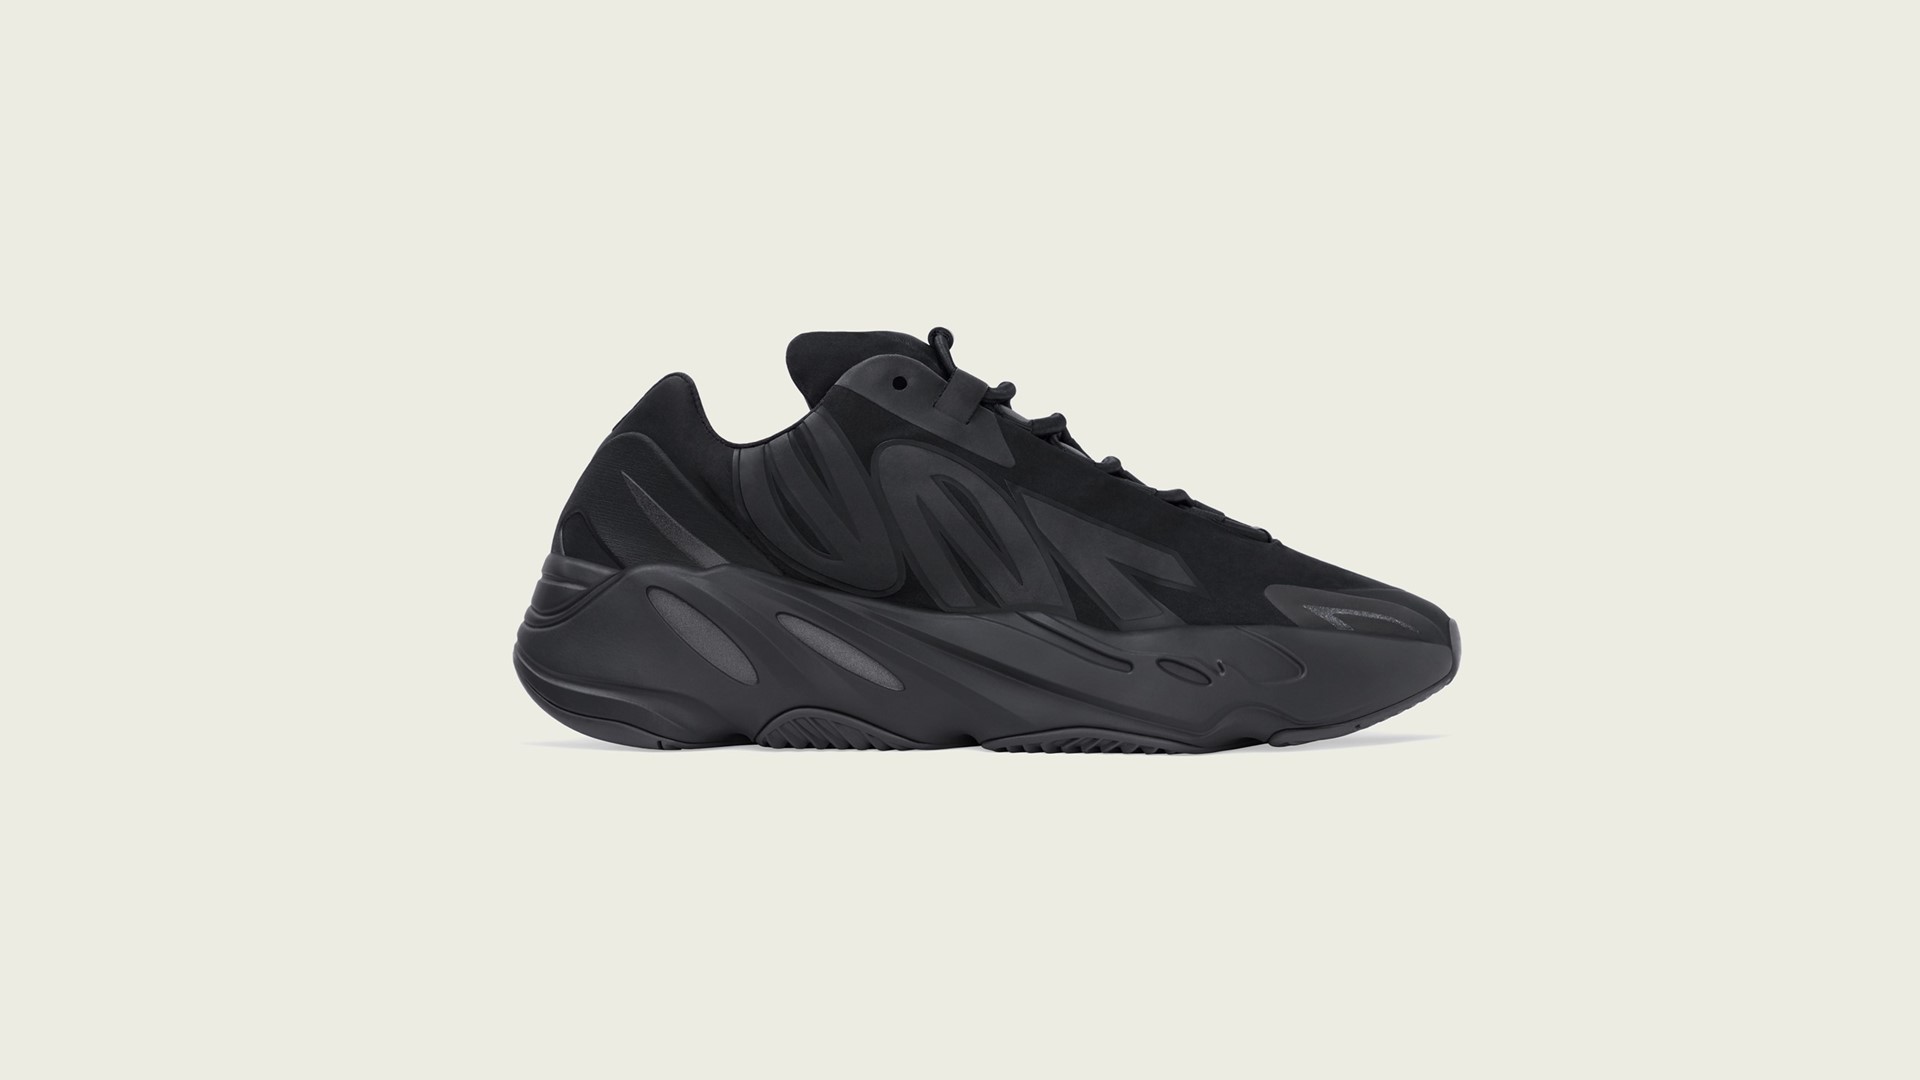 adidas + KANYE announce the YEEZY BOOST 700 MNVN Black